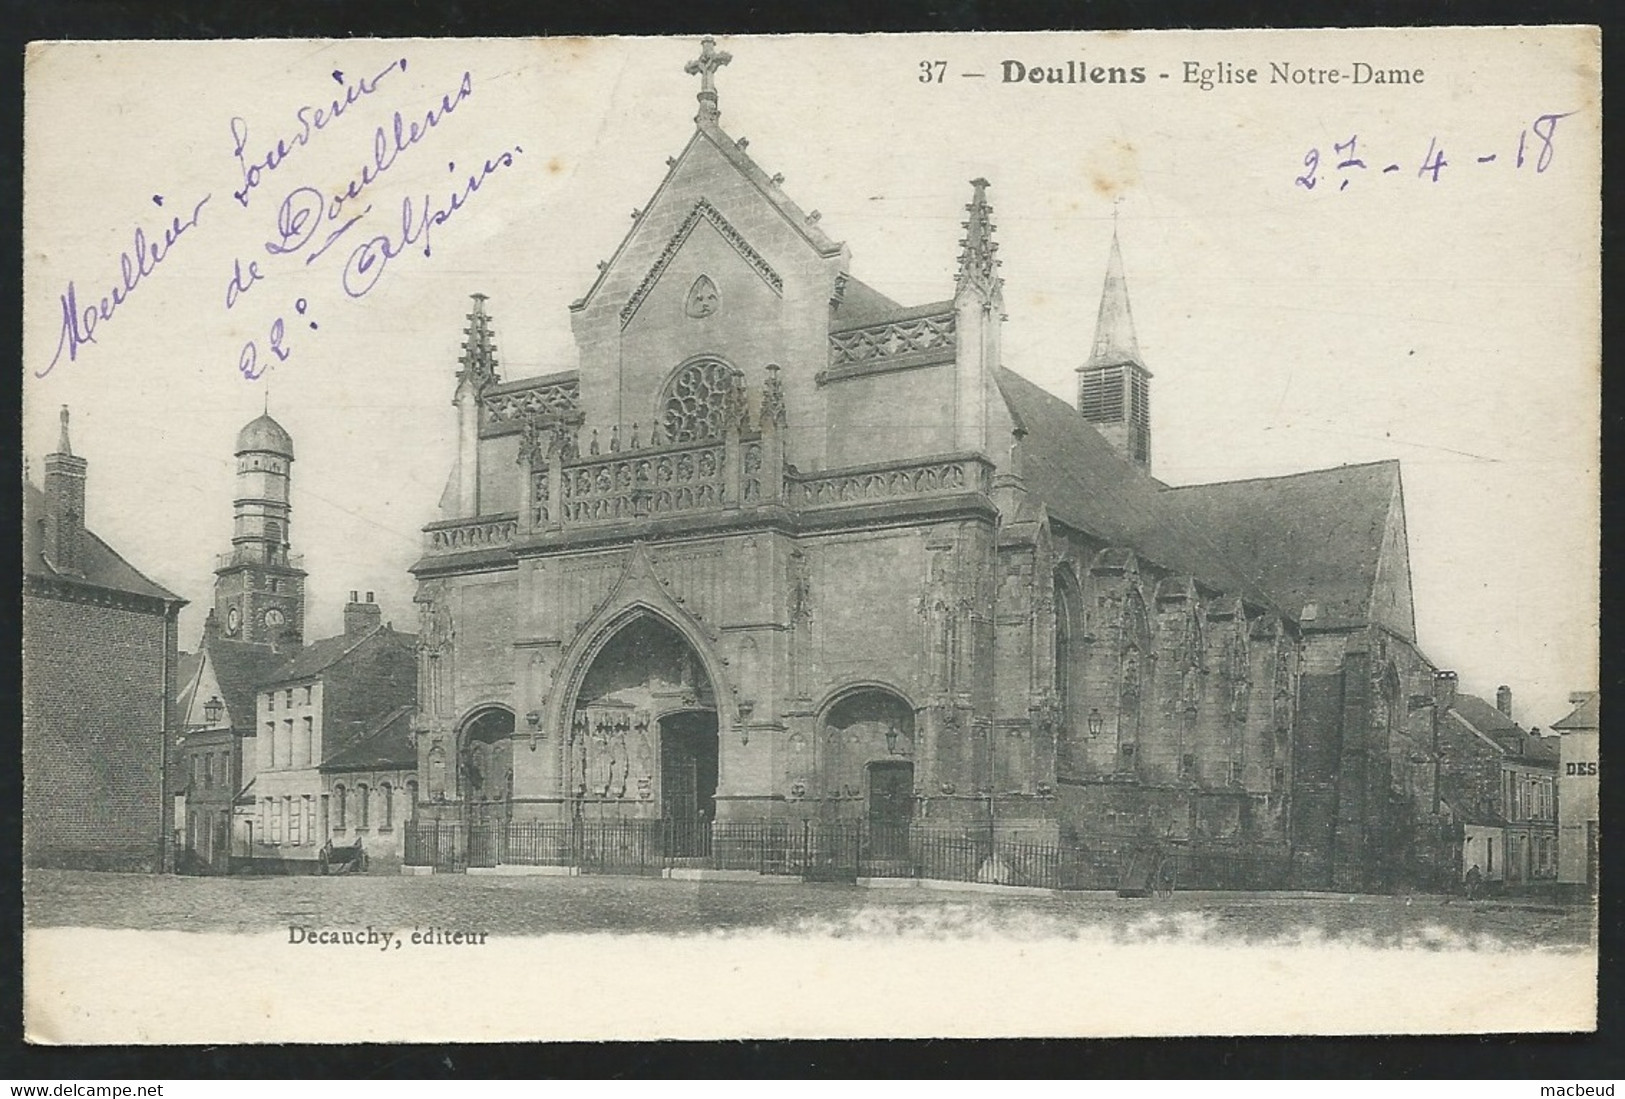 N° 37 - DOULLENS. Eglise Notre-Damee - Maca1658 - Doullens